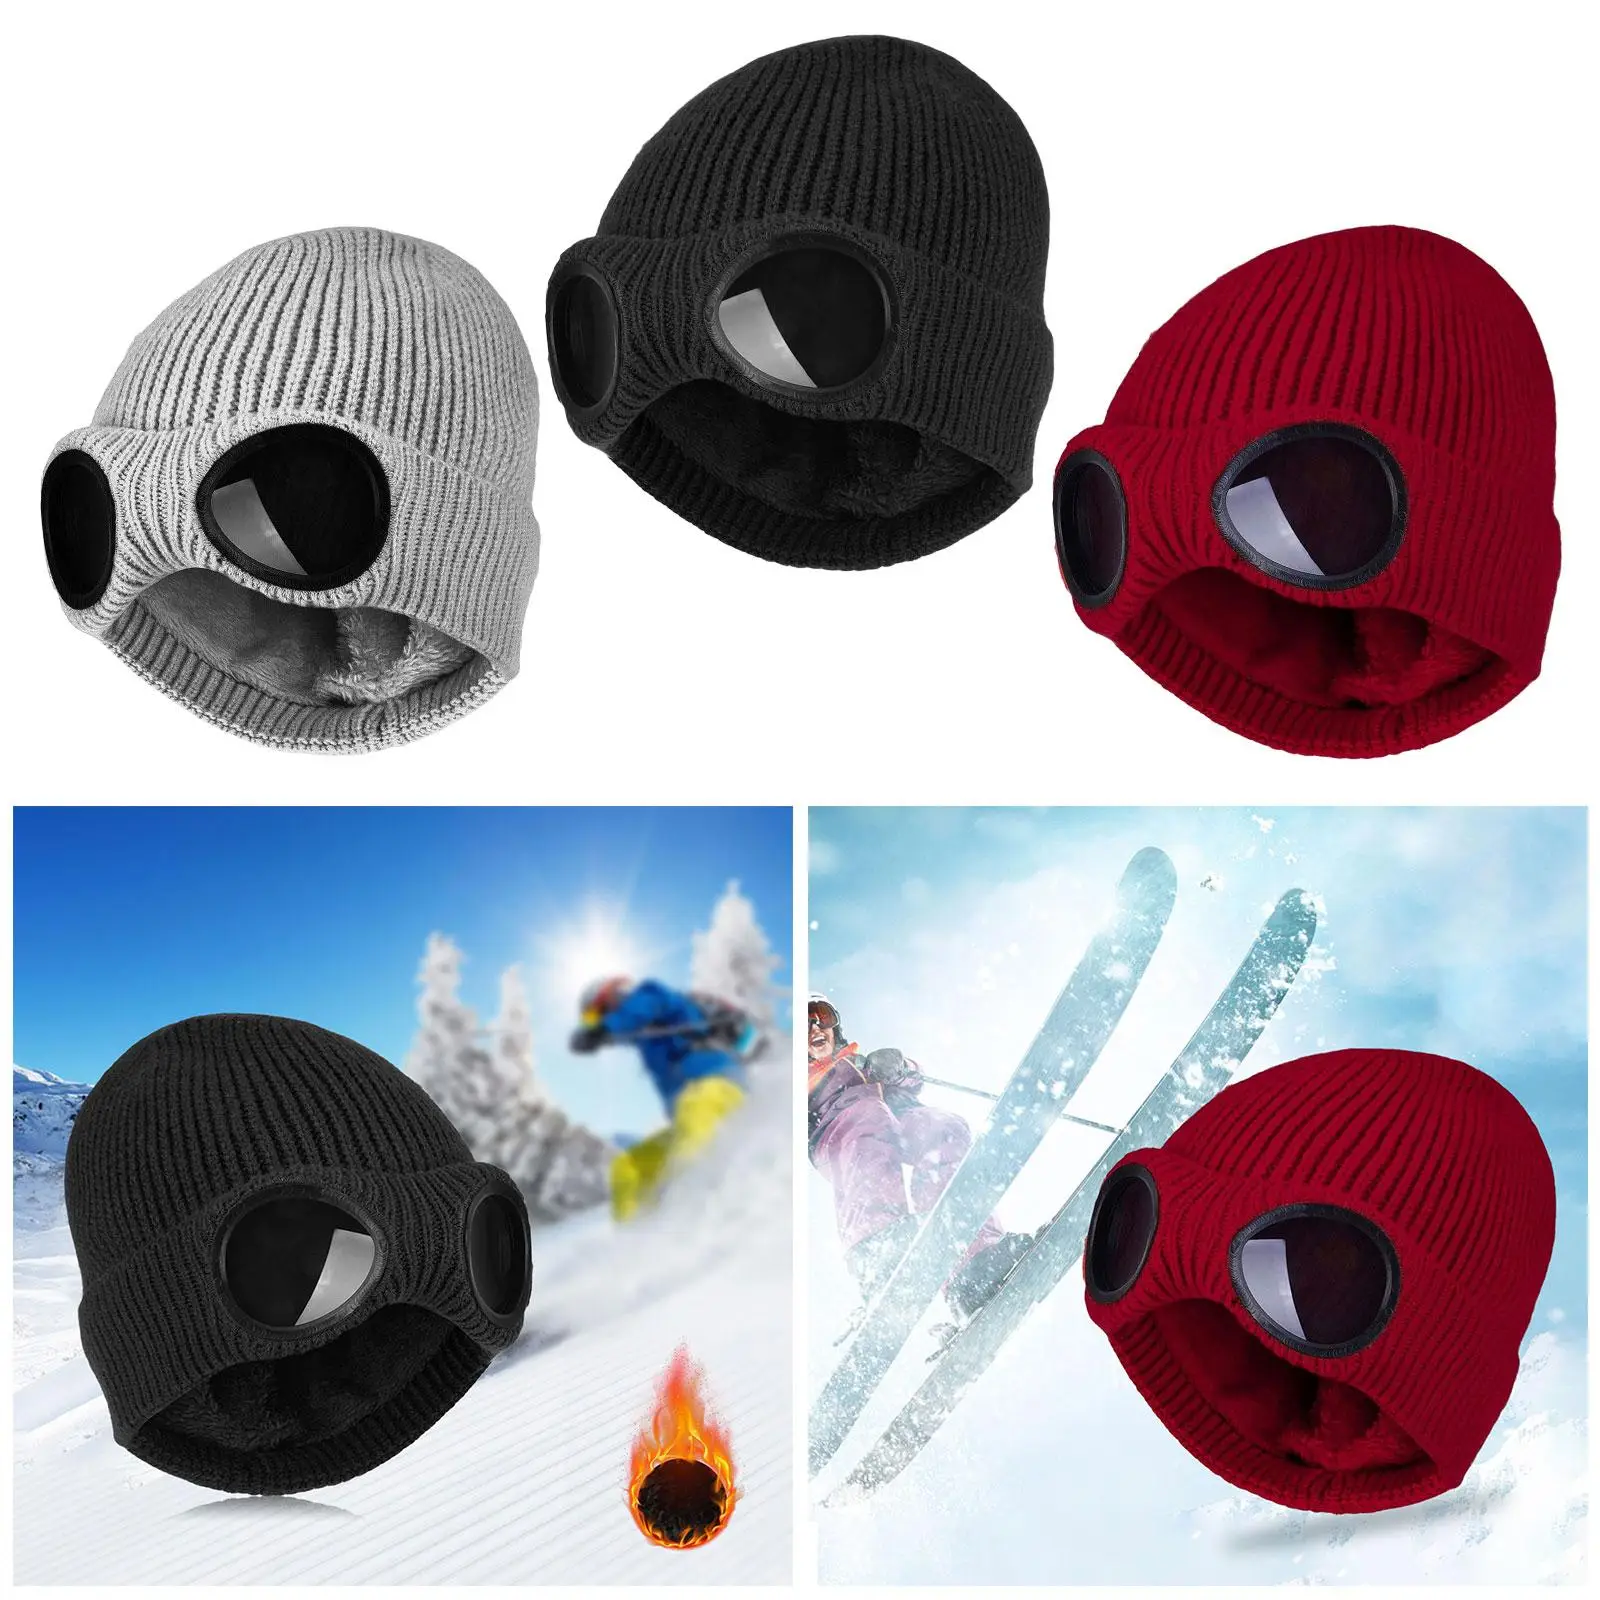 Fashion Winter Warm Knit Hats Thicken Headgear Plush Soft with Glasses Caps for Men Women Girls Boys Hiking Riding Cycling